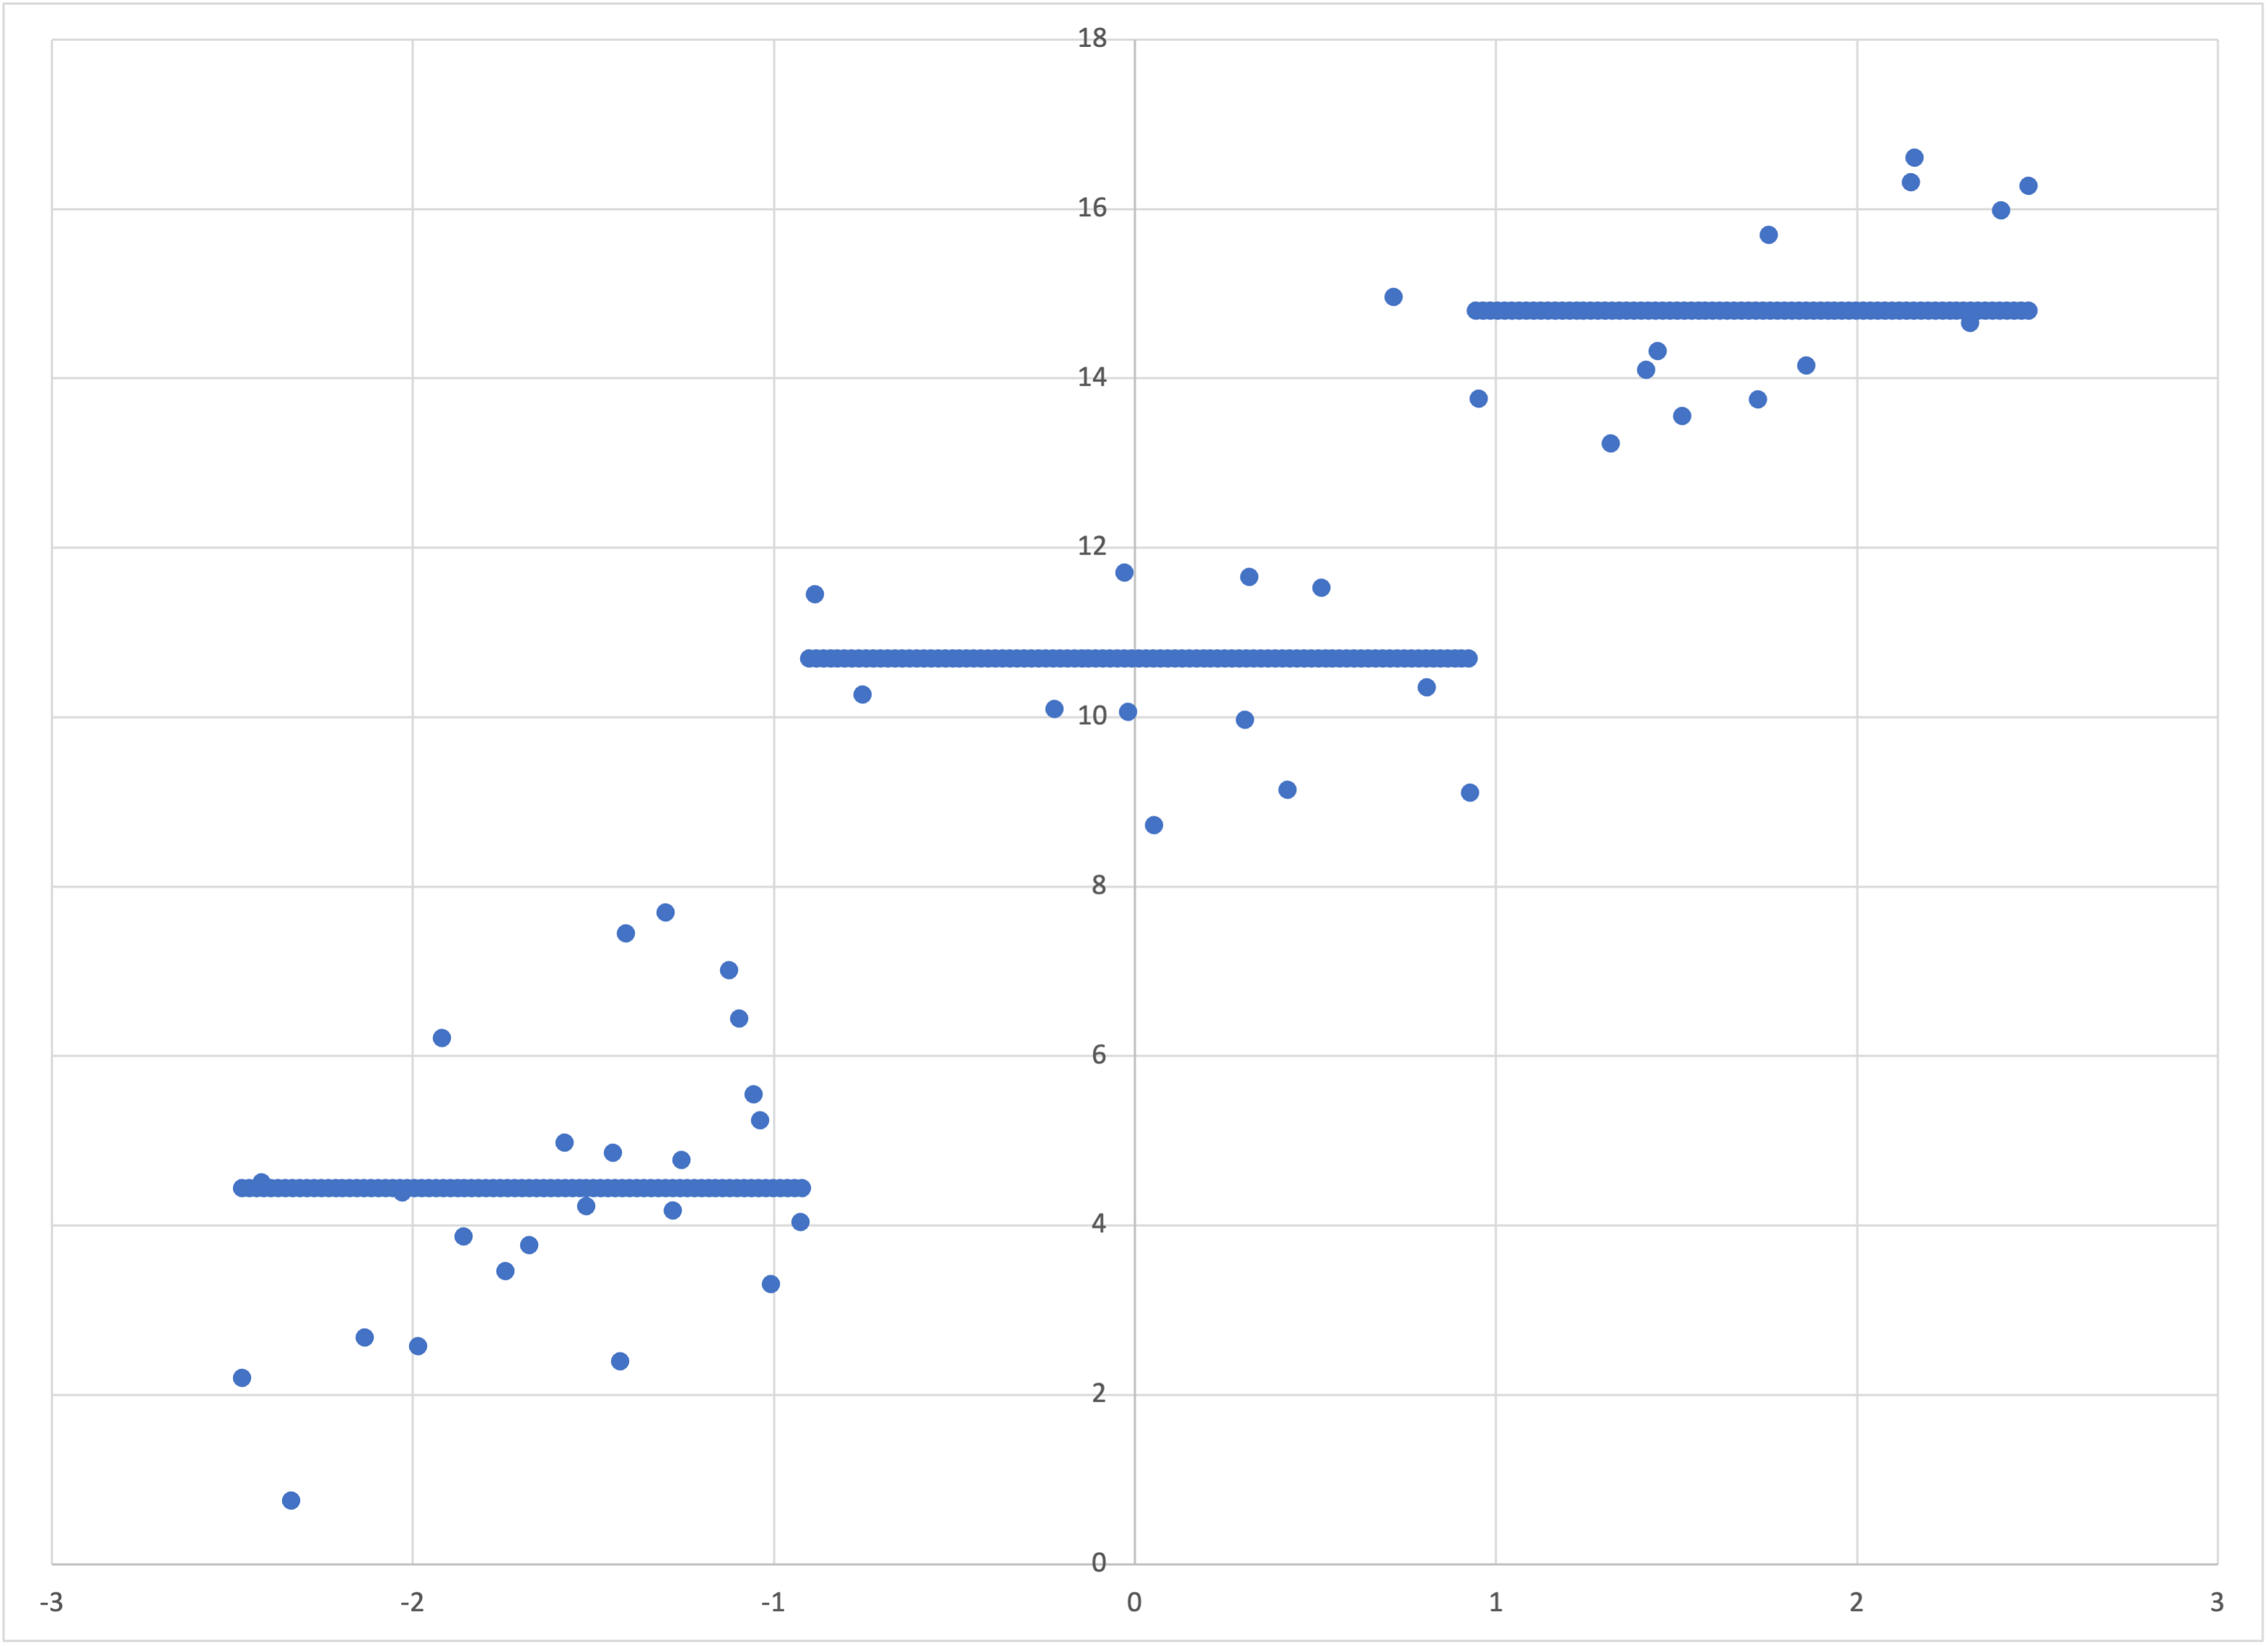 Scatterplot of the first two colummns of linear-3-debug.csv